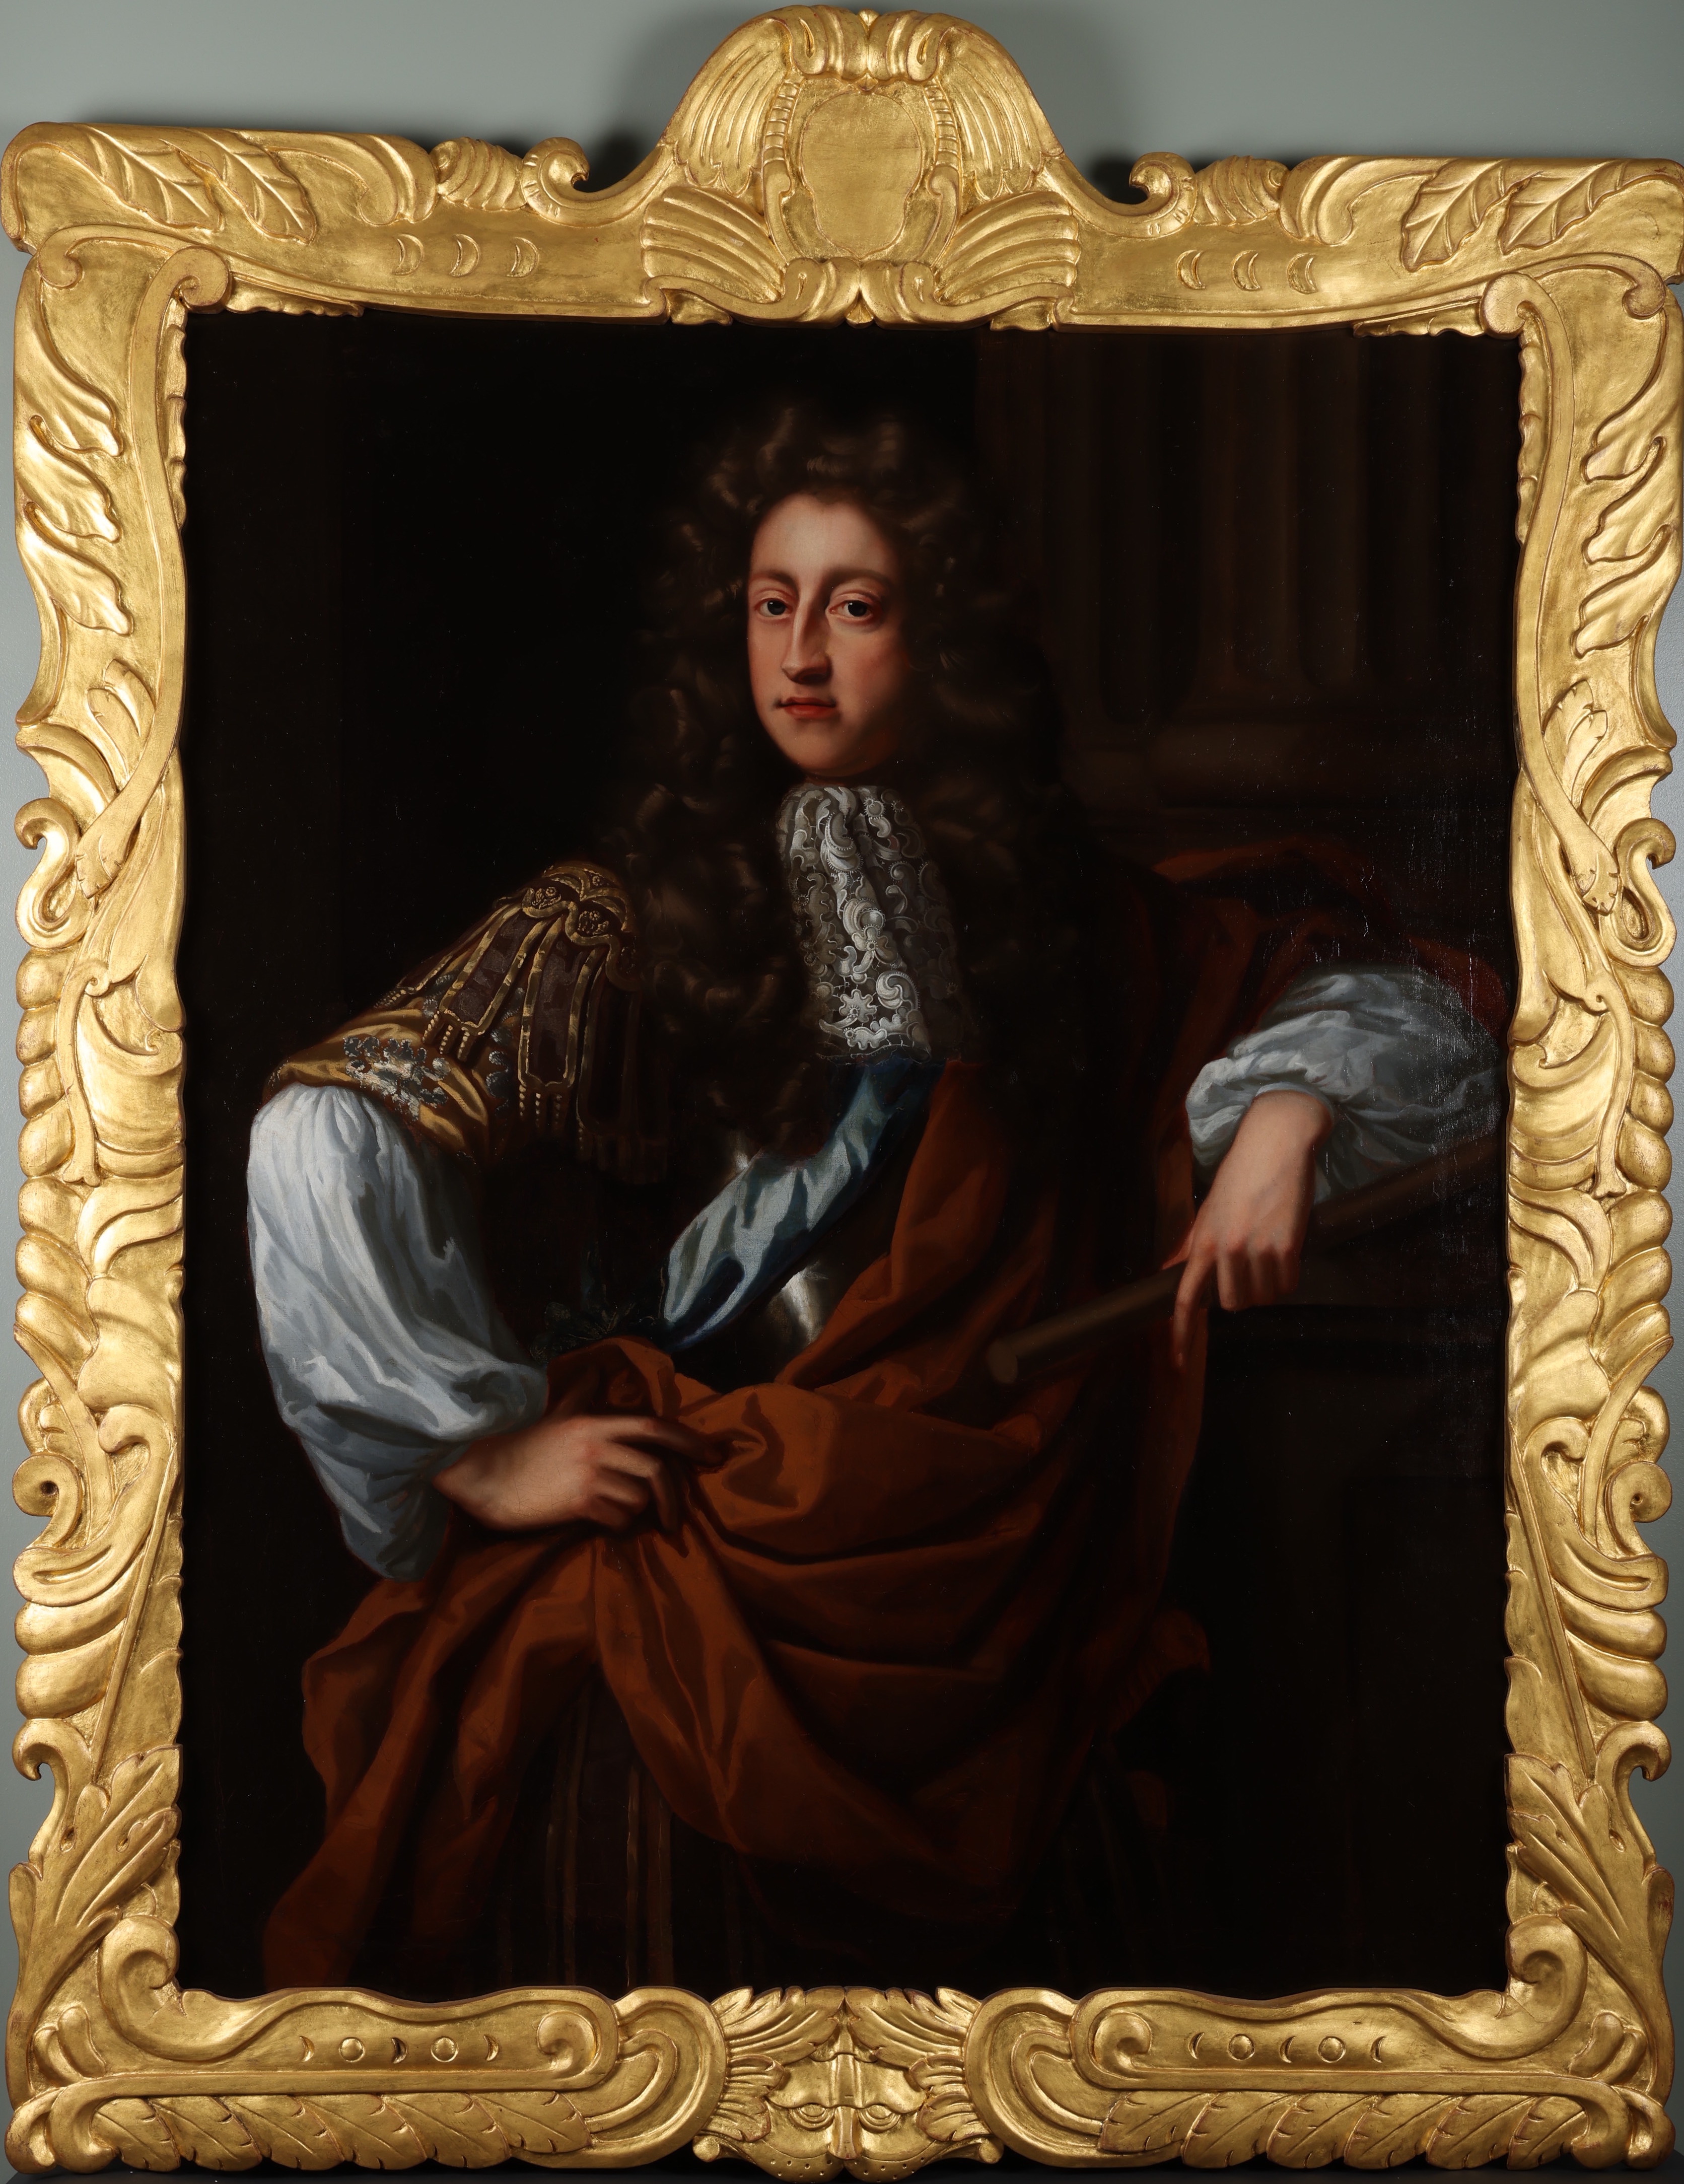 Attributed Riley, John (1646-1691), Portrait of Prince George of Denmark